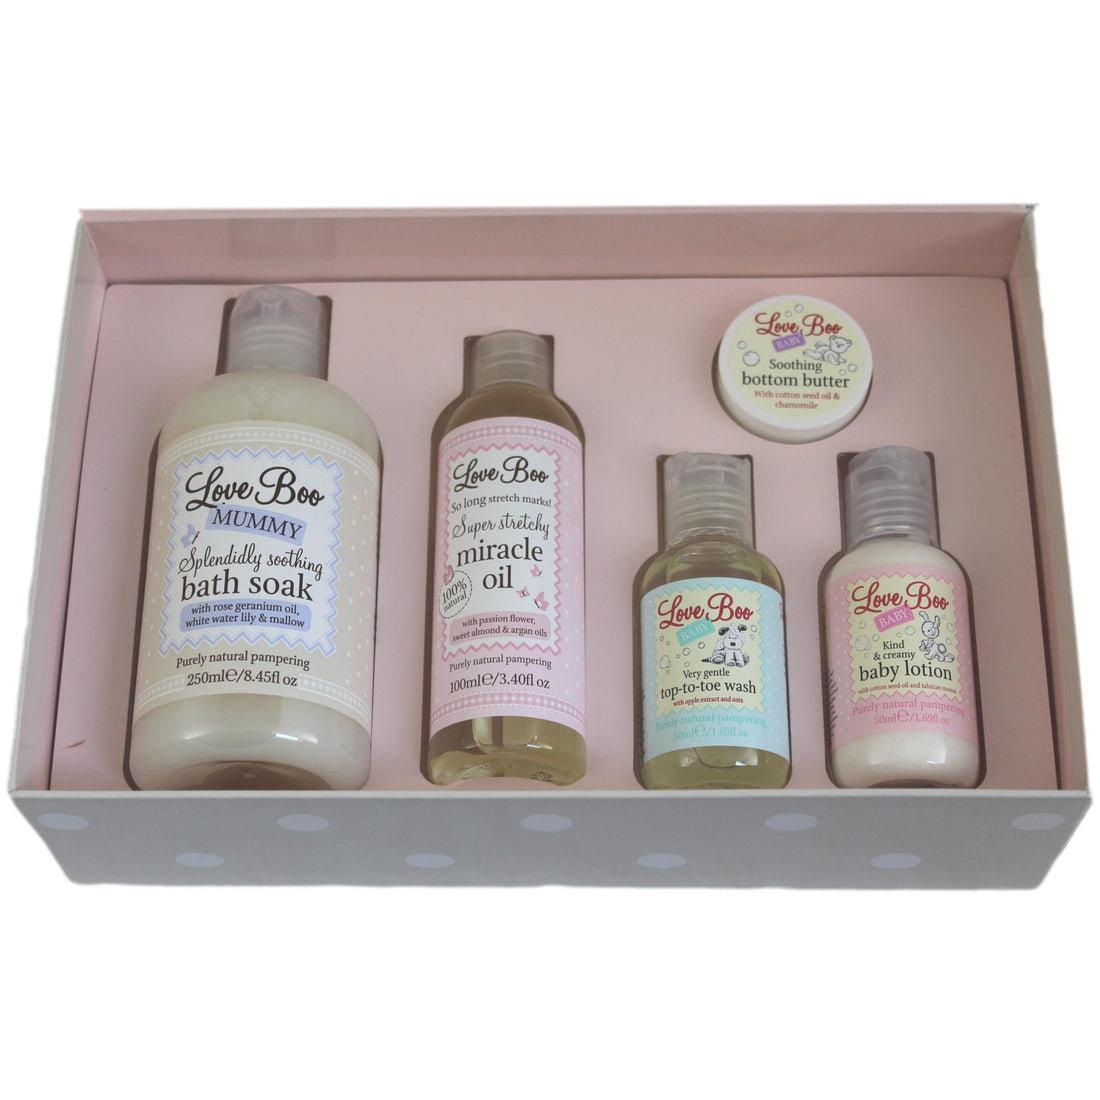 Love Boo Mummy and Me Pamper Kit inside